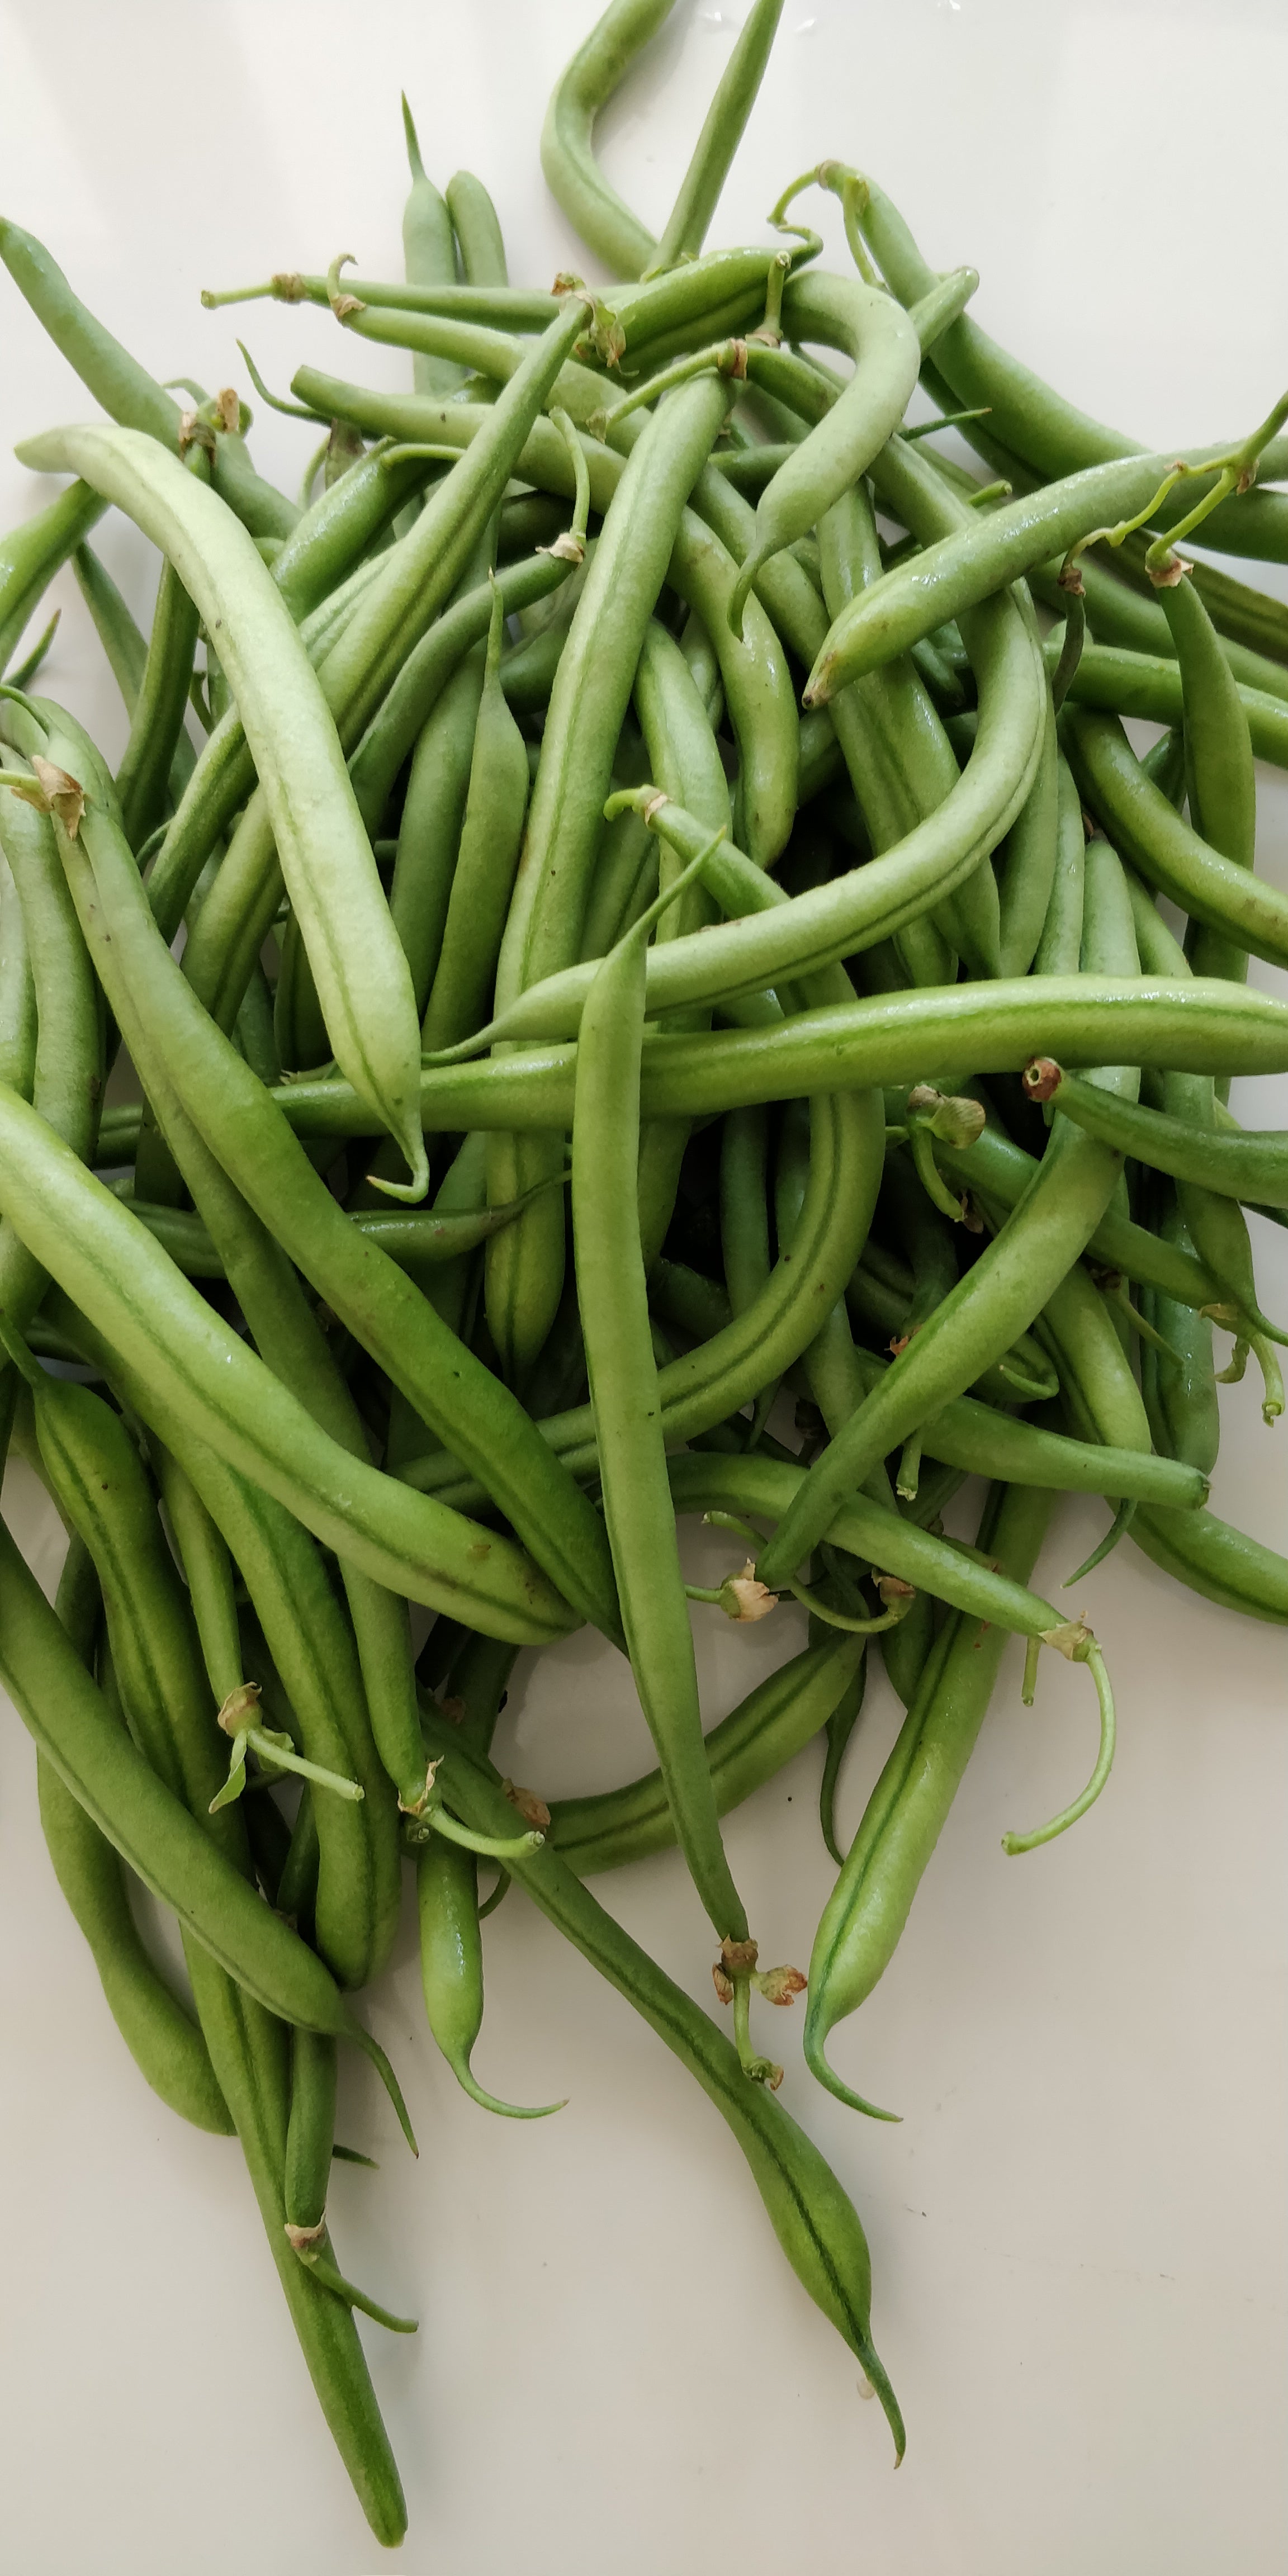 Haricot Verts - Green Beans With a French Flair